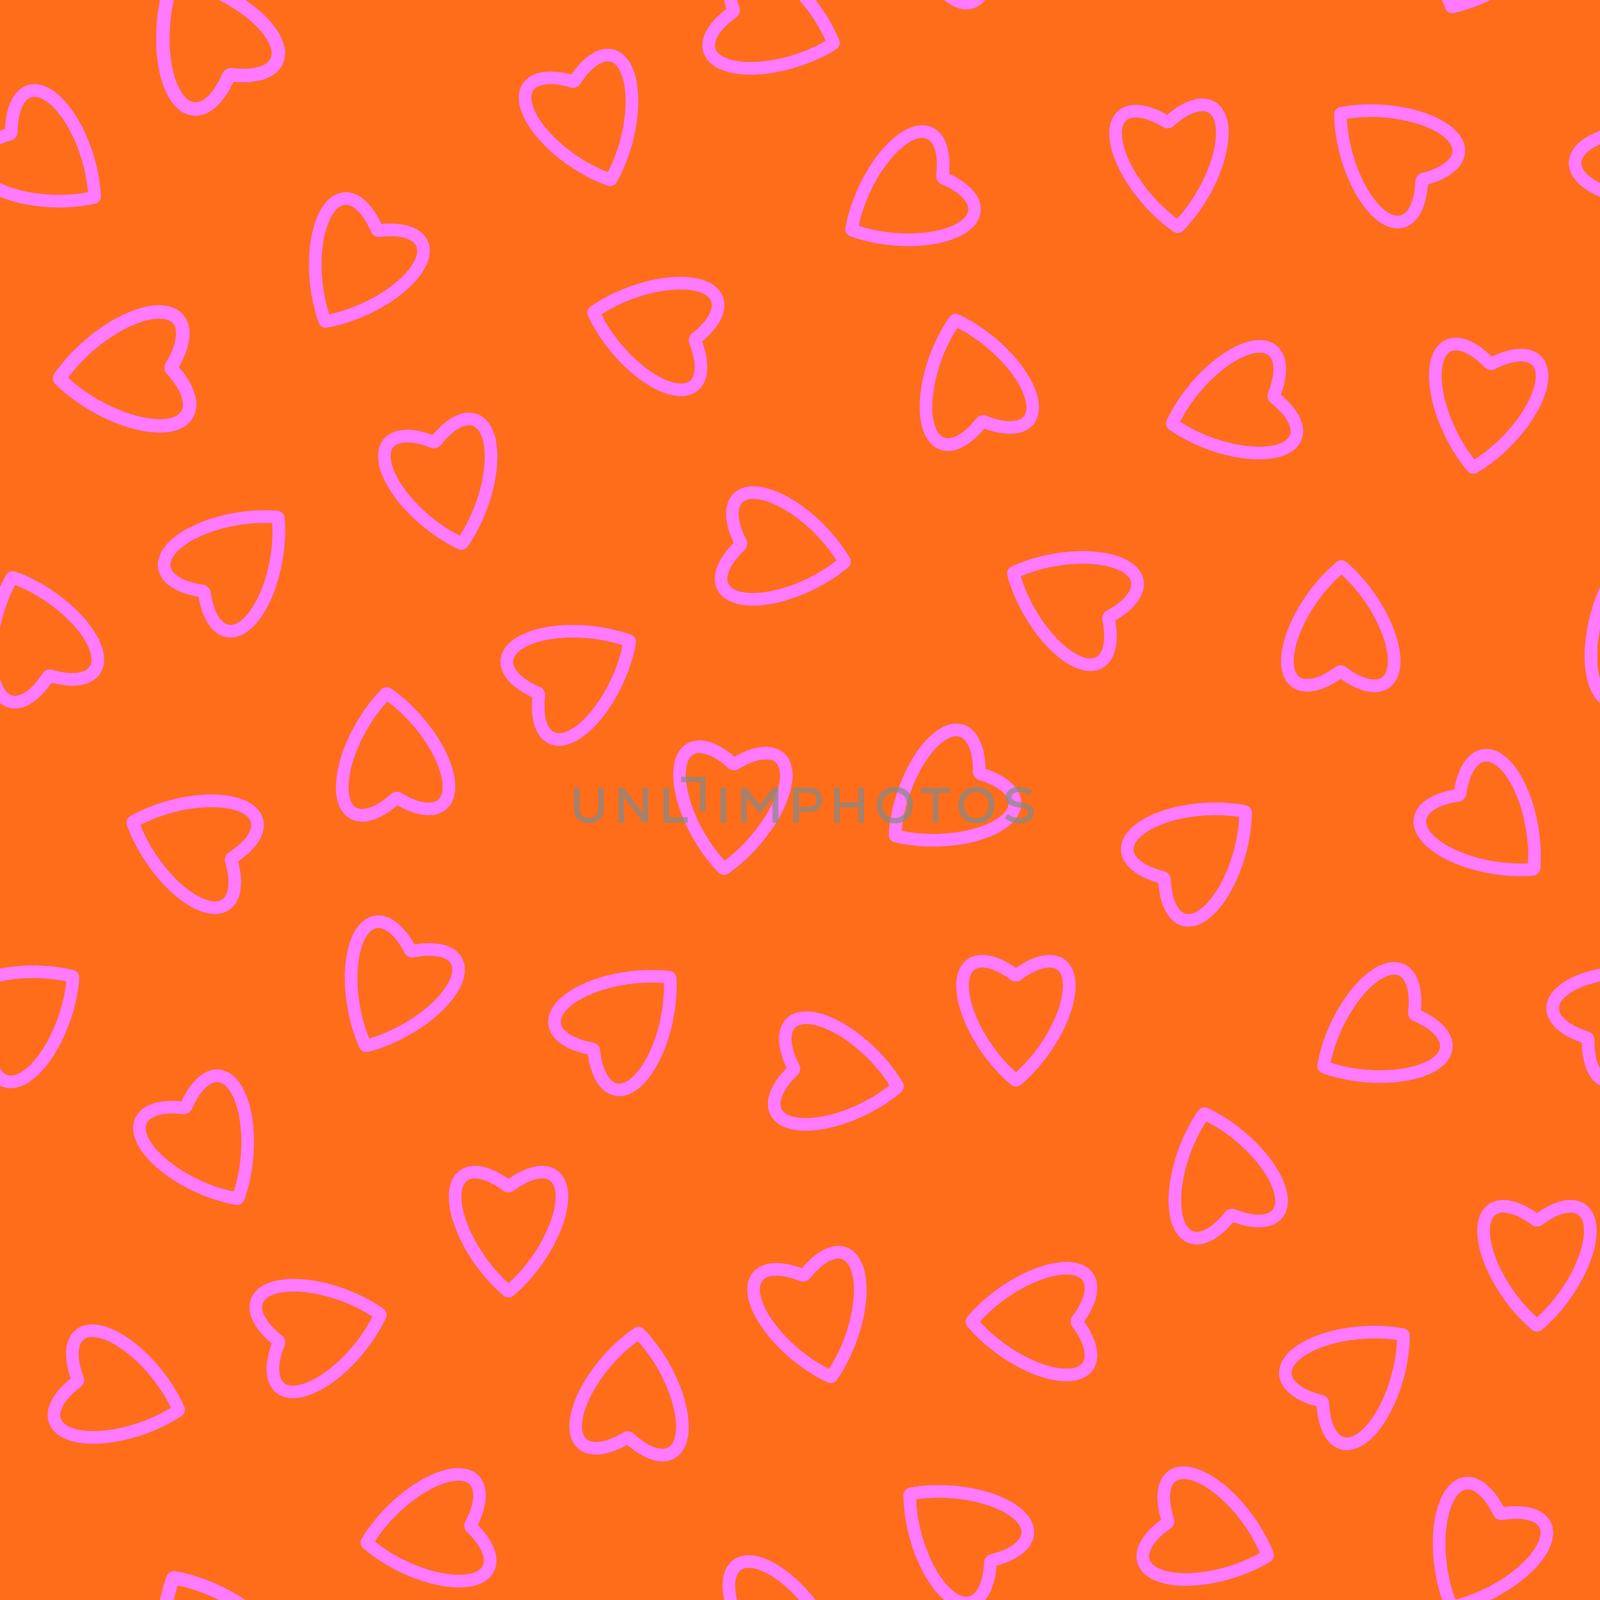 Simple hearts seamless pattern,endless chaotic texture made of tiny heart silhouettes.Valentines,mothers day background.Great for Easter,wedding,scrapbook,gift wrapping paper,textiles.Pink on orange by Angelsmoon